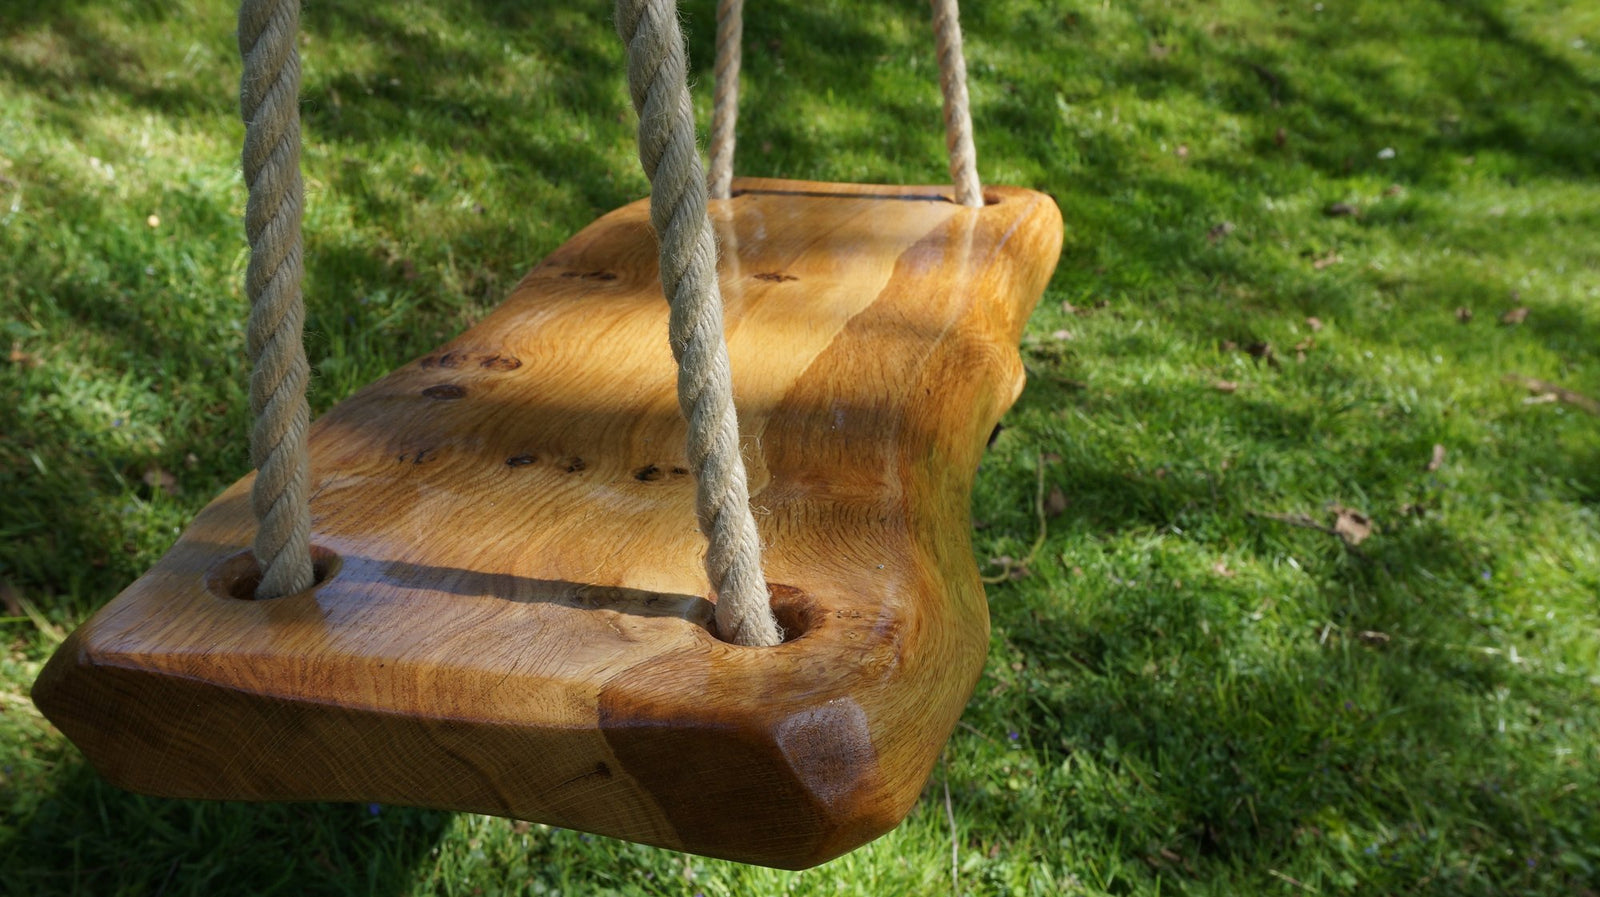 Oak Tree Swing Collection with free UK Delivery - The Fine Wooden Article  Company